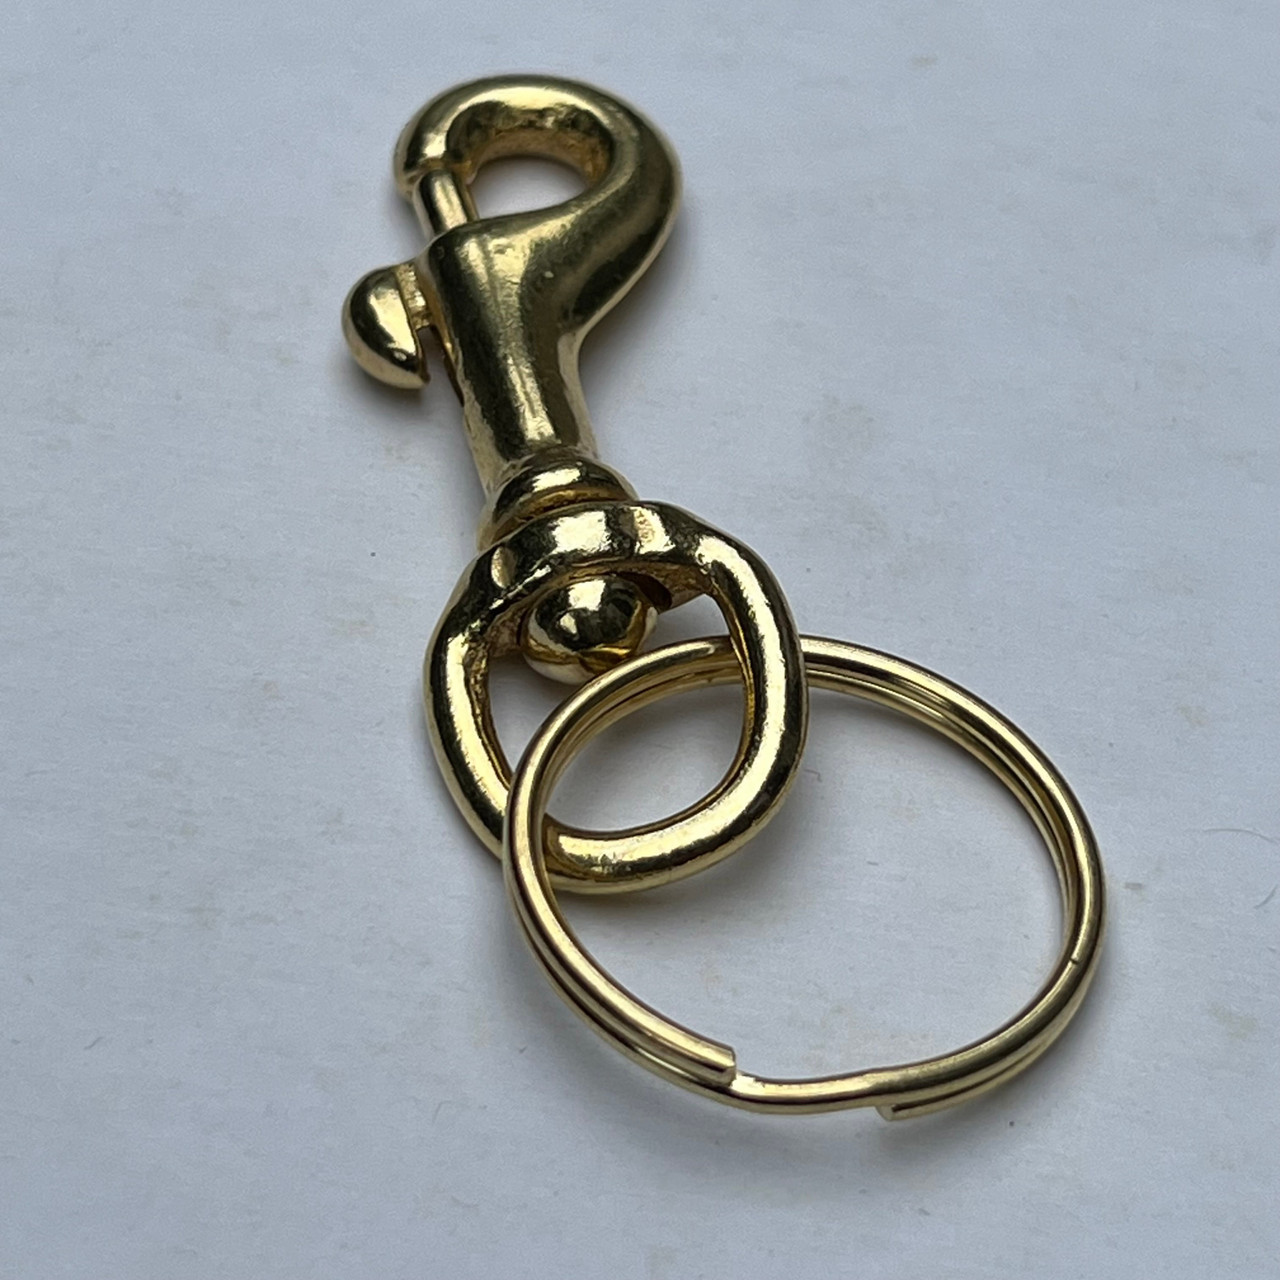 Shop for and Buy Heavy Duty Small Snap Clip Key Ring Solid Brass at  . Large selection and bulk discounts available.